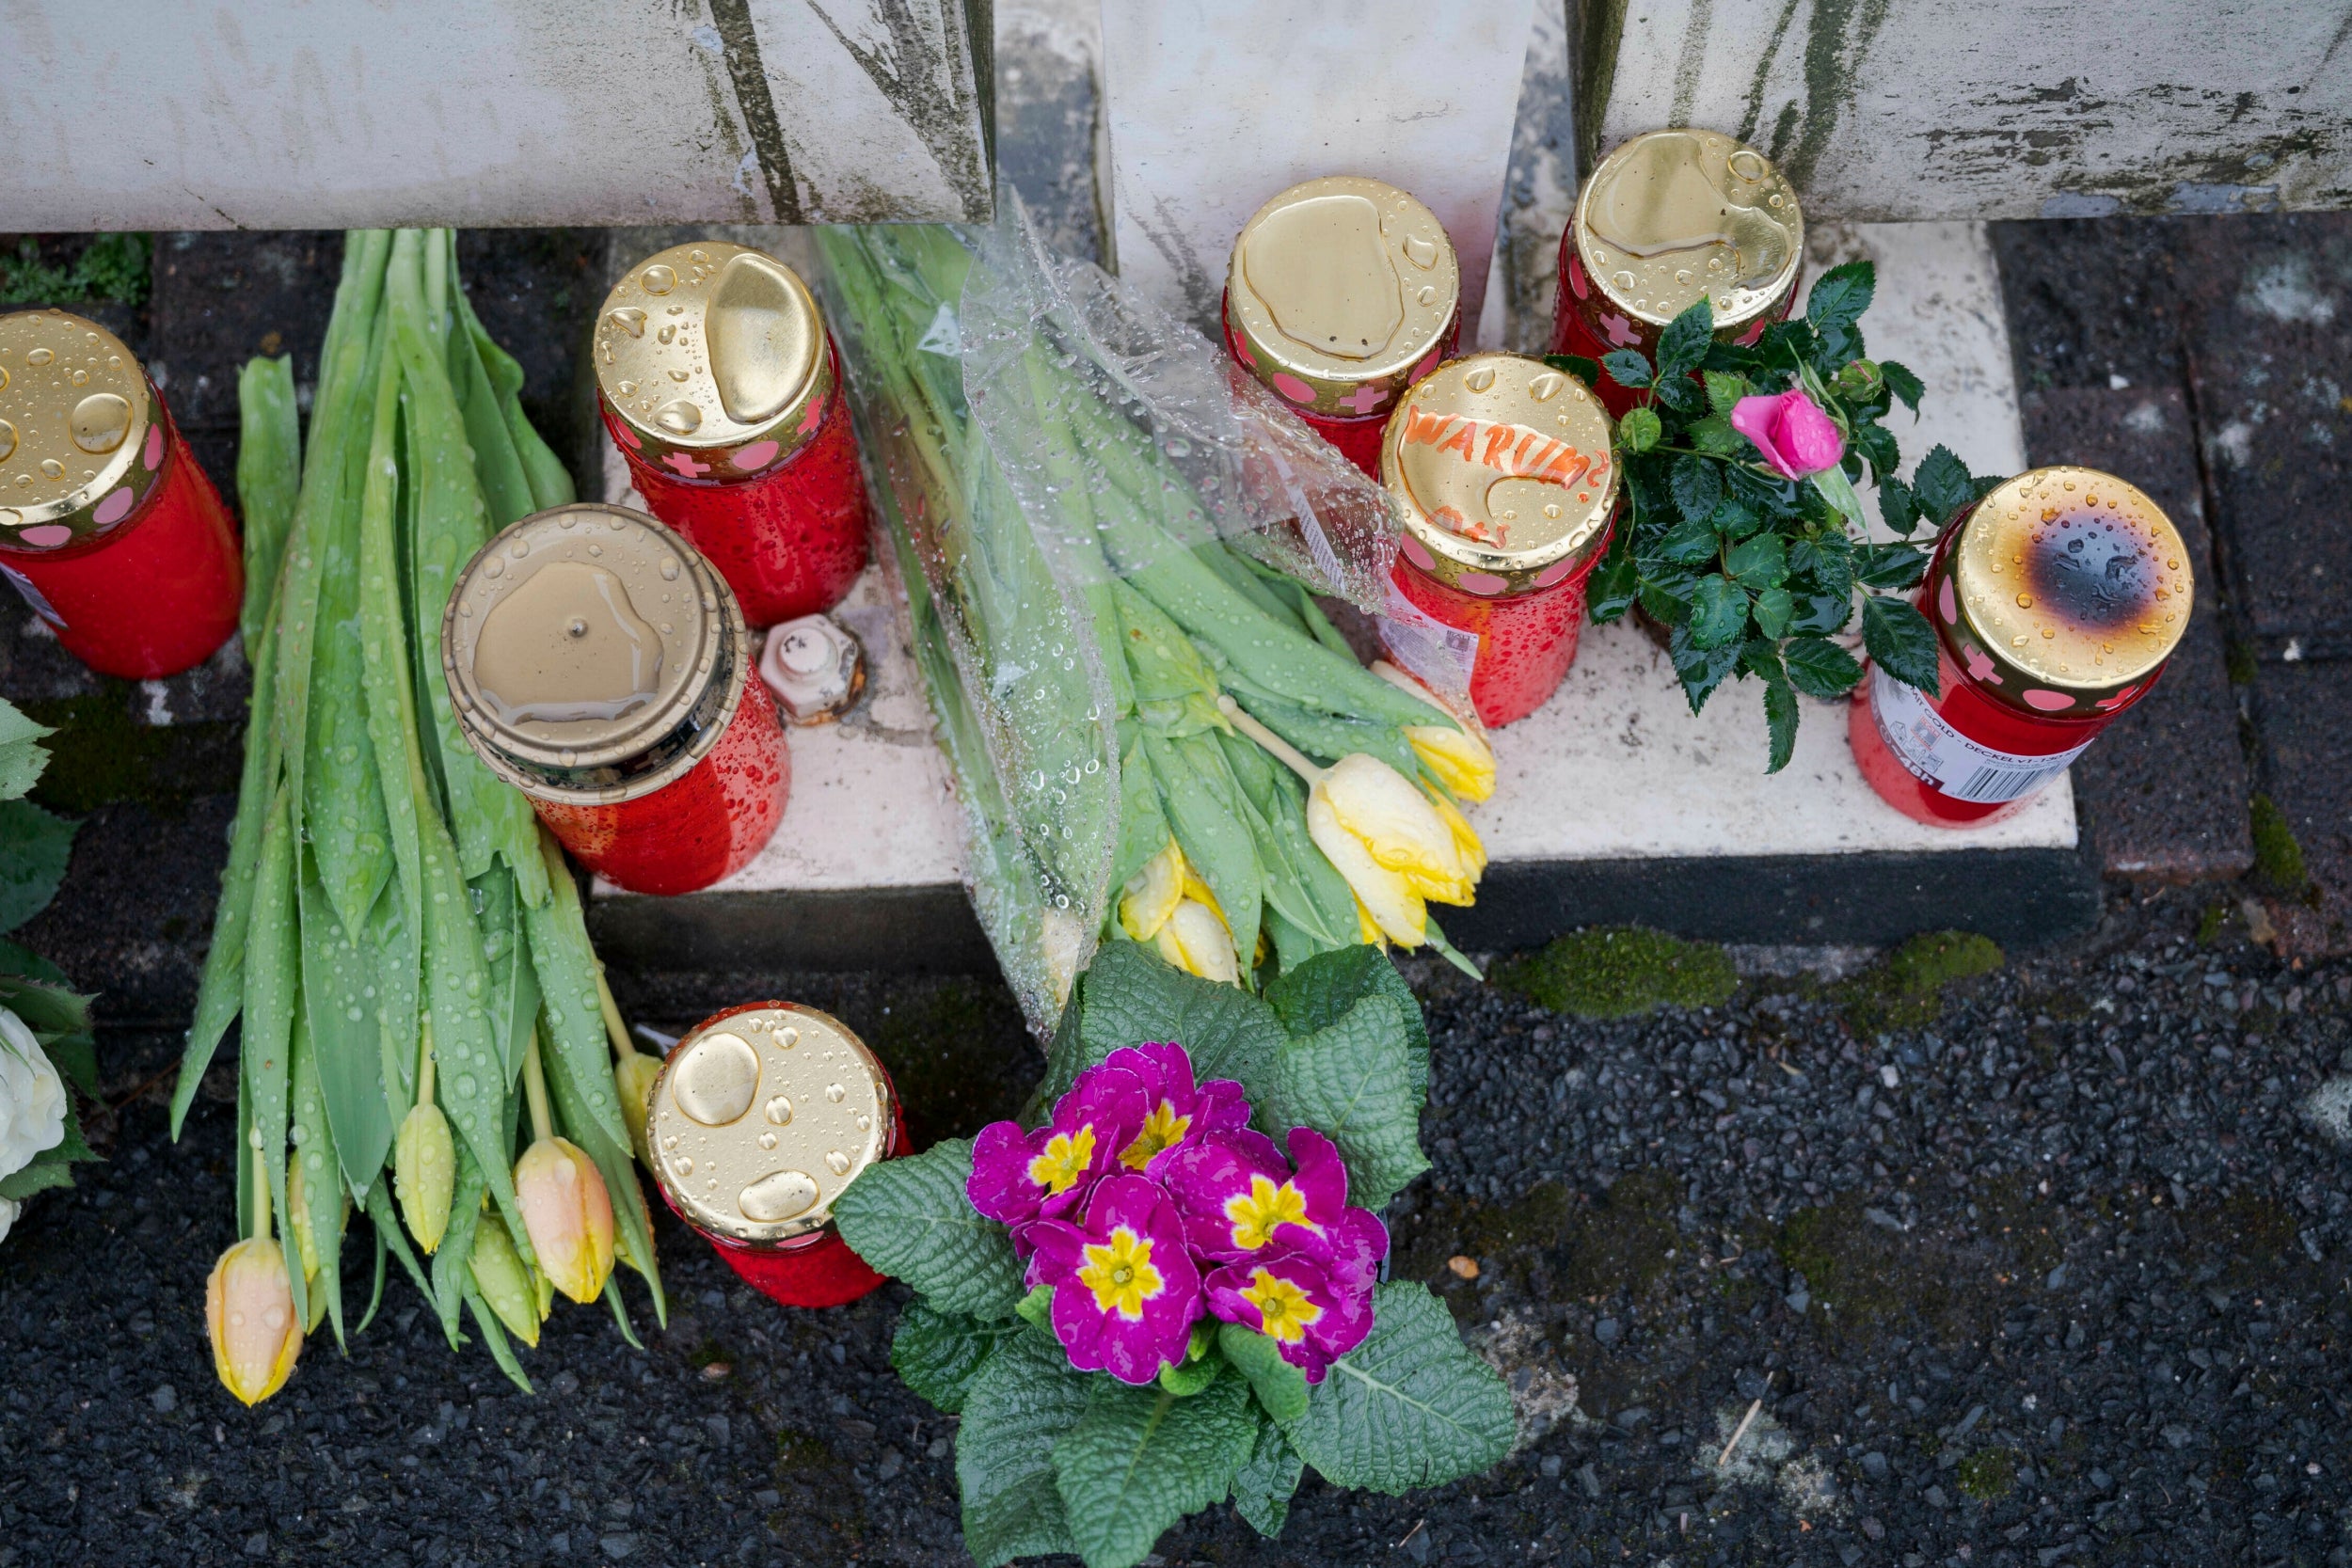 Flowers at the home of a doctor, who died in an explosion in Enkenbach-Alsenborn in Germany